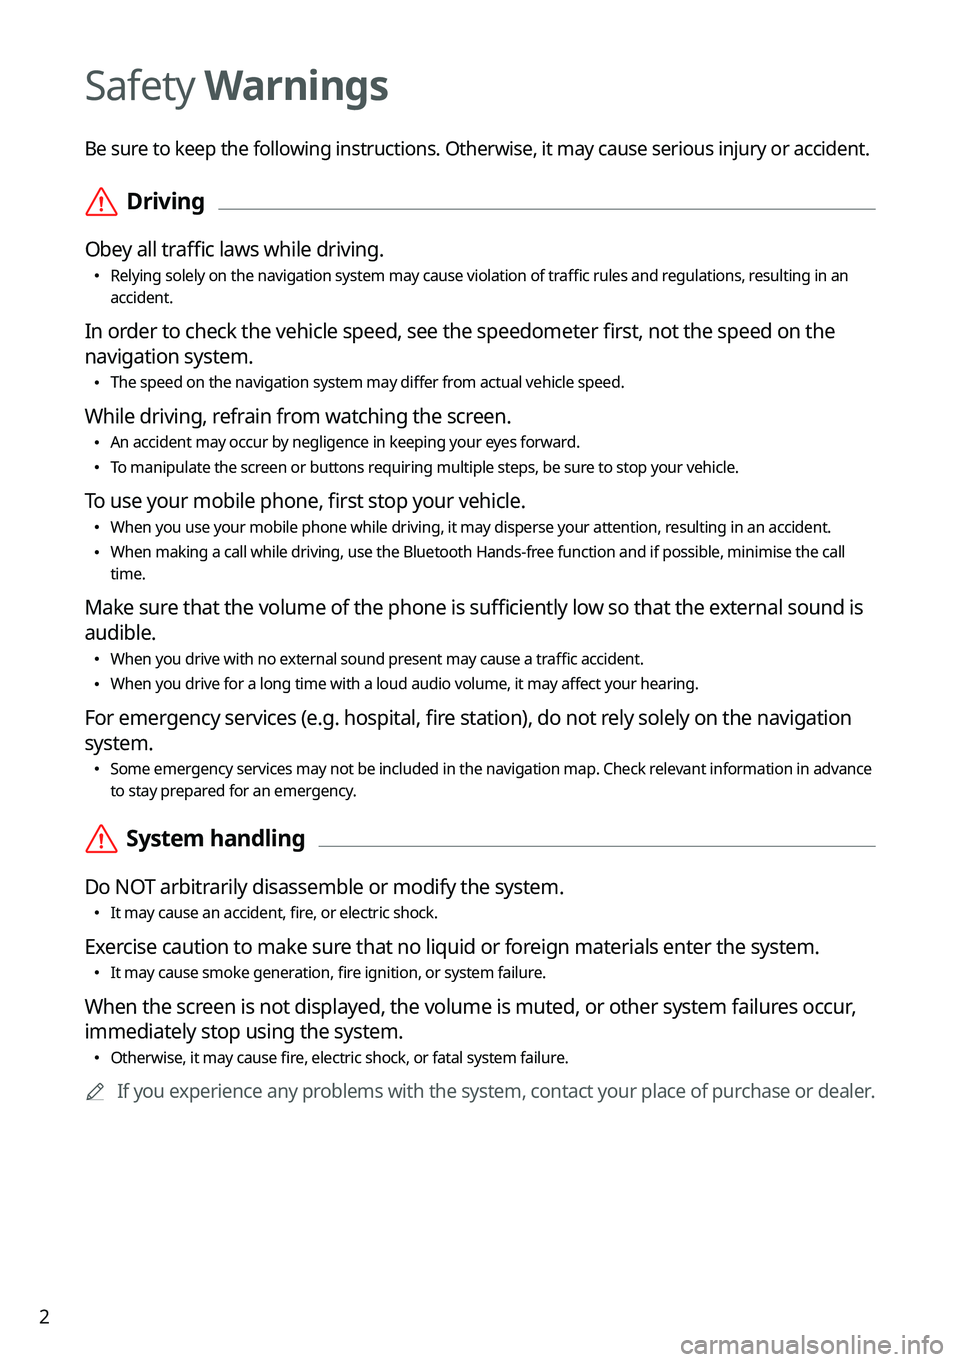 KIA FORTE 2022  Navigation System Quick Reference Guide 2
Safety Warnings
Be sure to keep the following instructions. Otherwise, it may cause serious injury or accident.
 \335Driving
Obey all traffic laws while driving.
 \225
Relying solely on the navigati